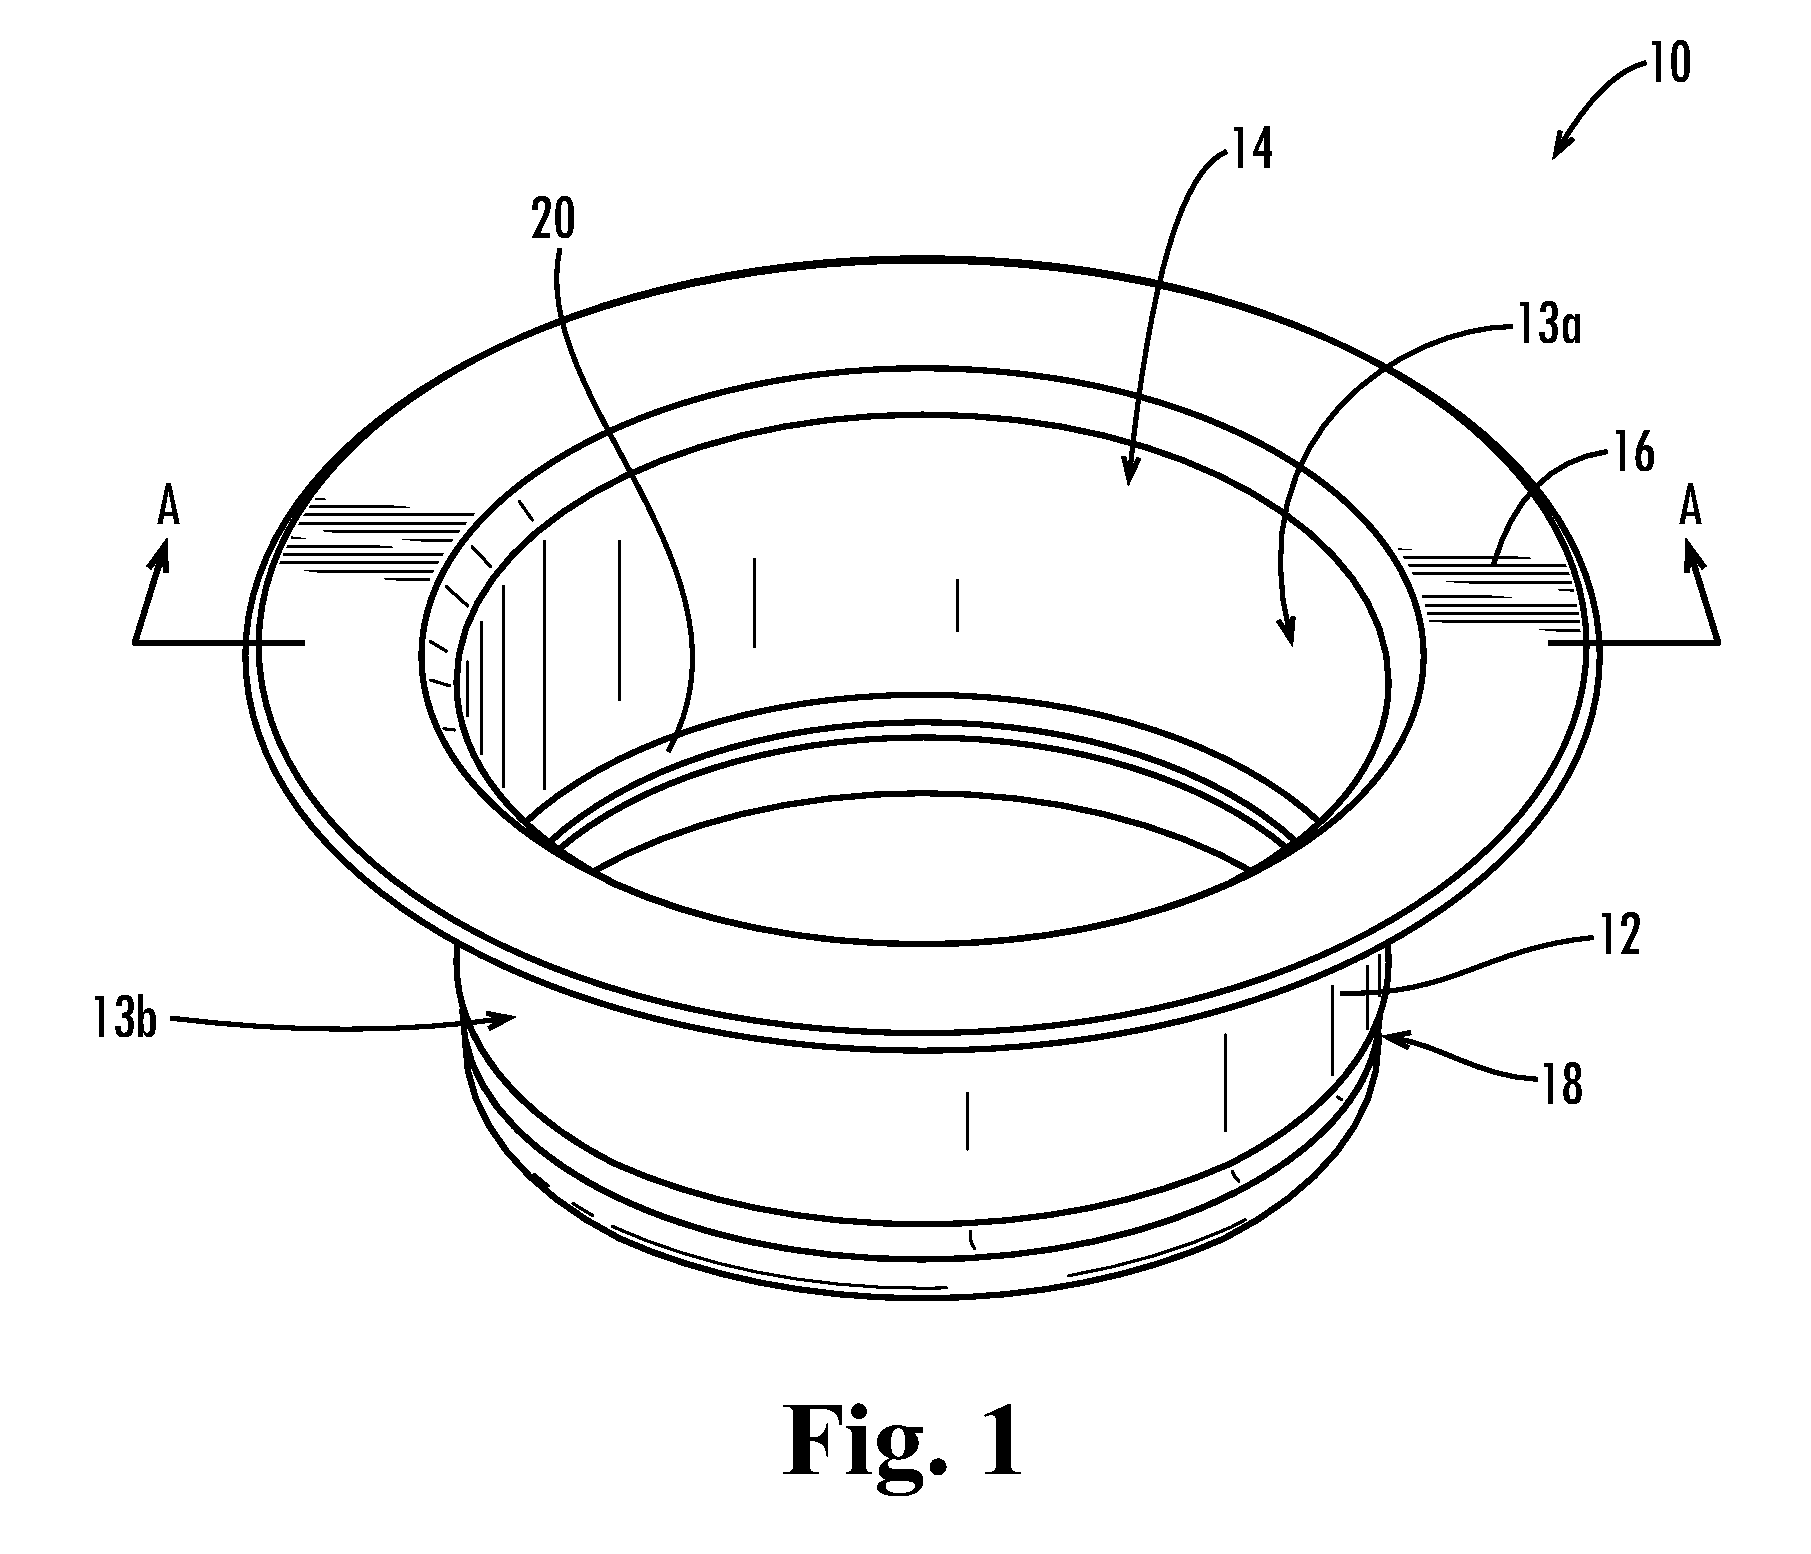 Decorative disposer flange and strainer assembly